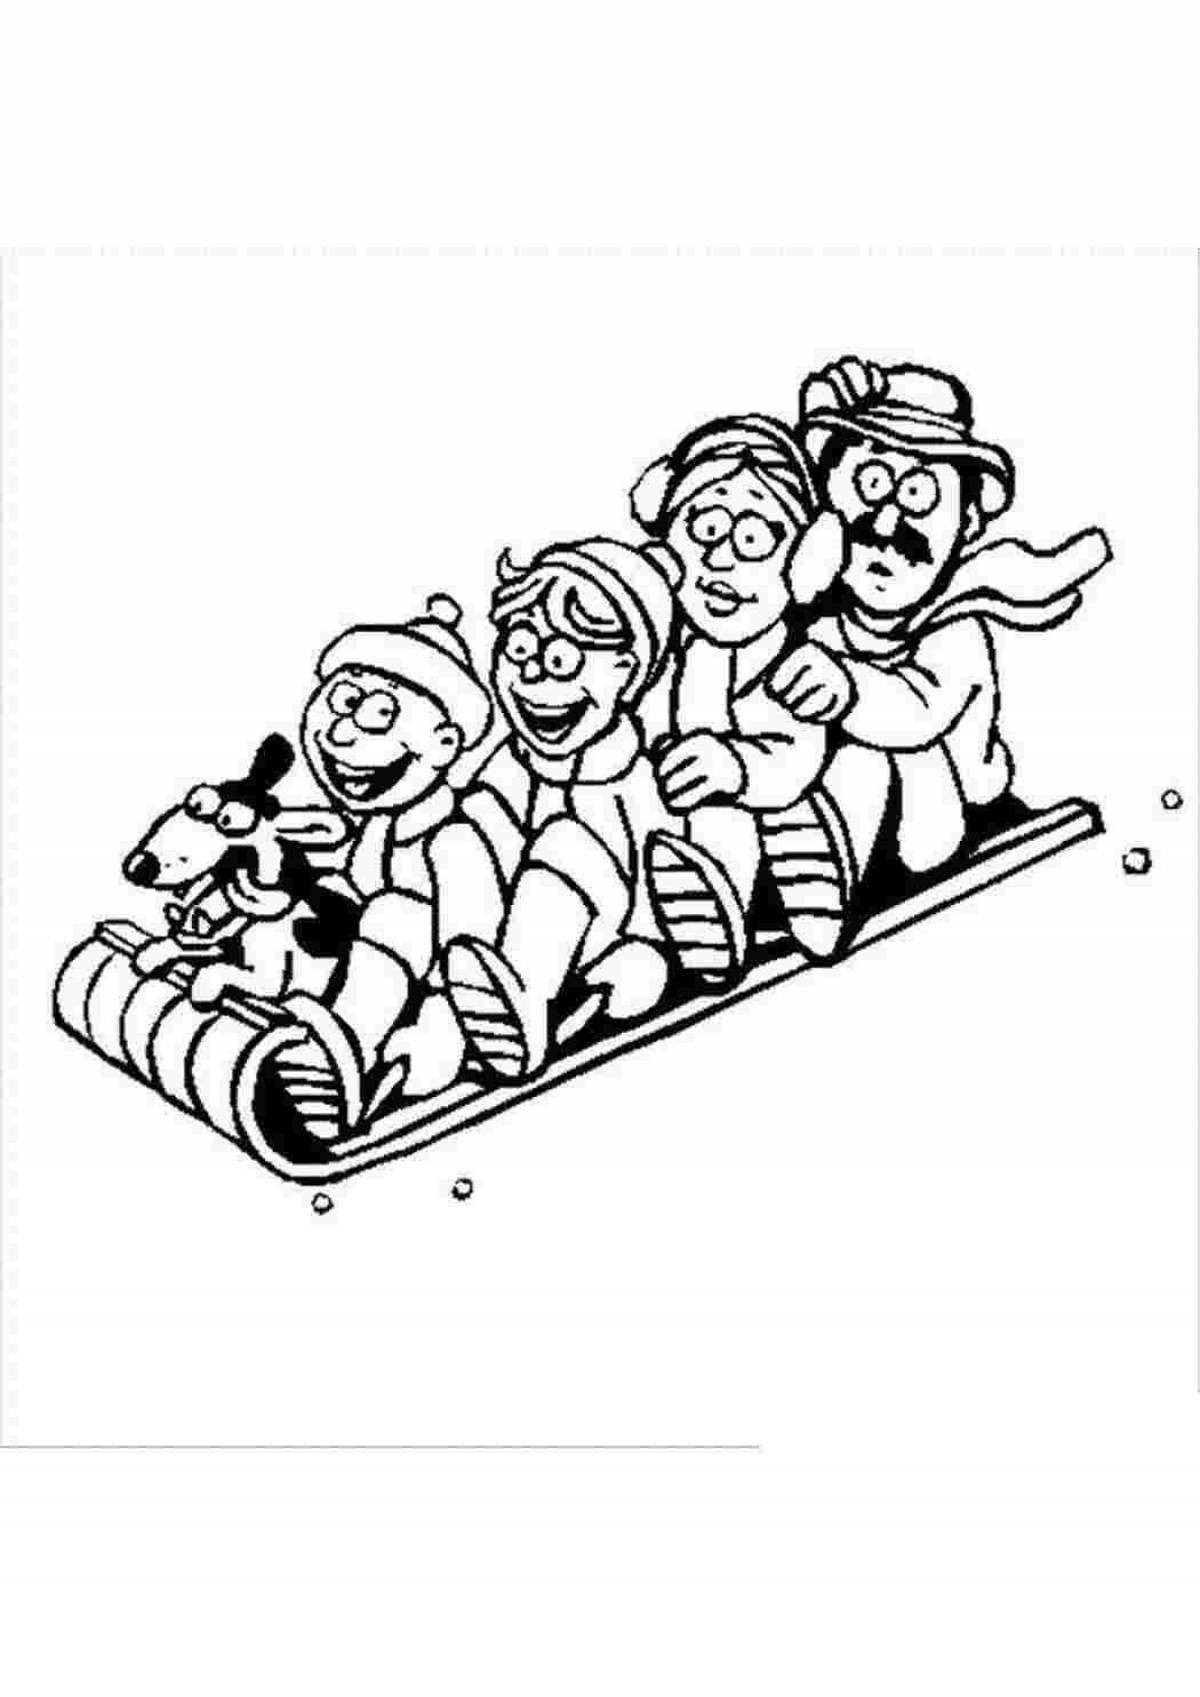 Entertaining sports family coloring book